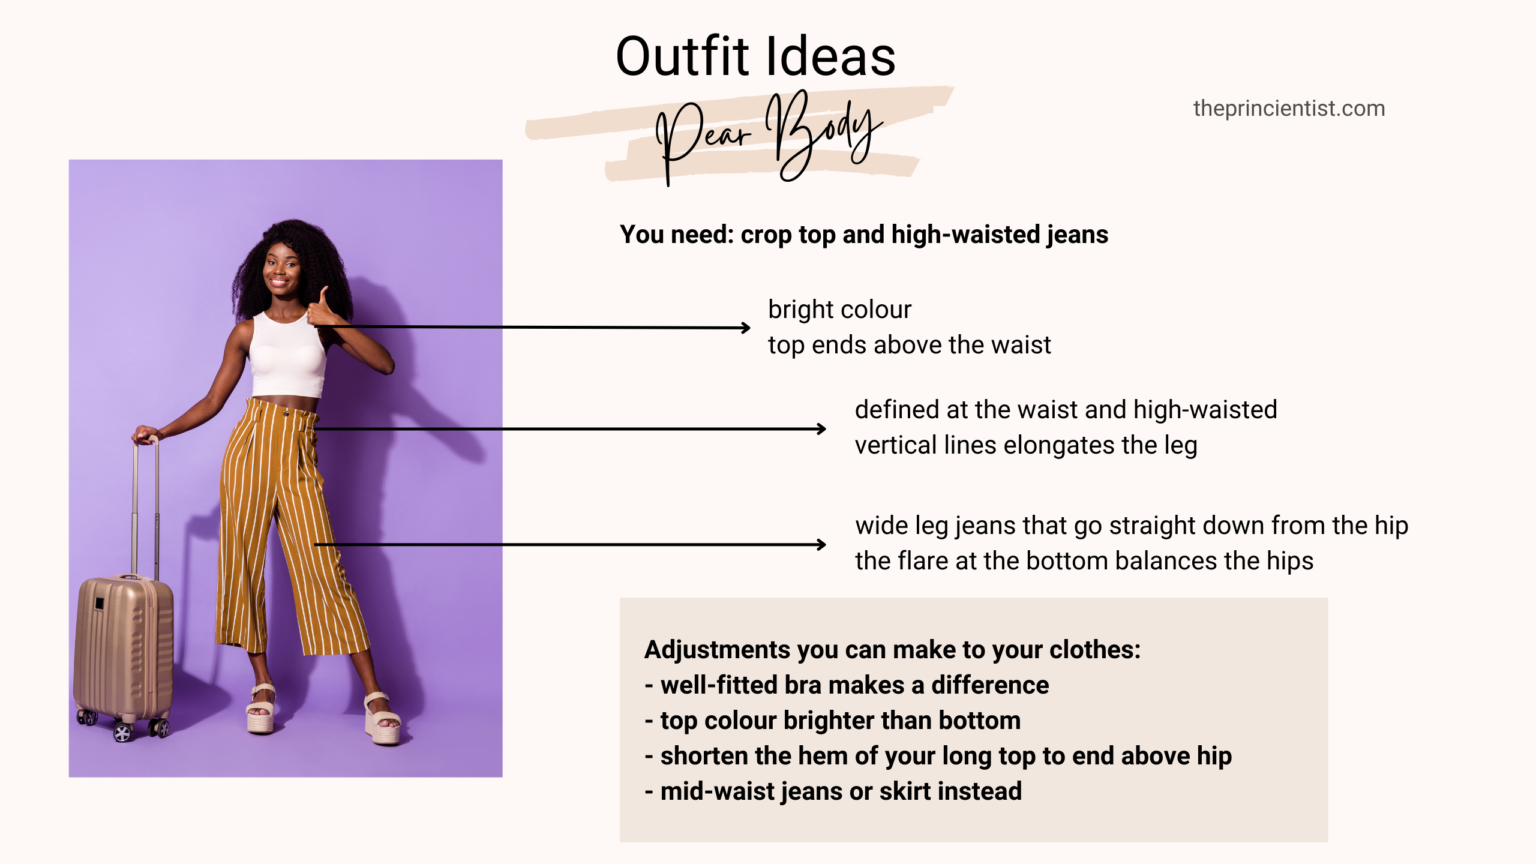 outfit ideas pear body shape 3 - crop top and jeans and instructions to replicate at home